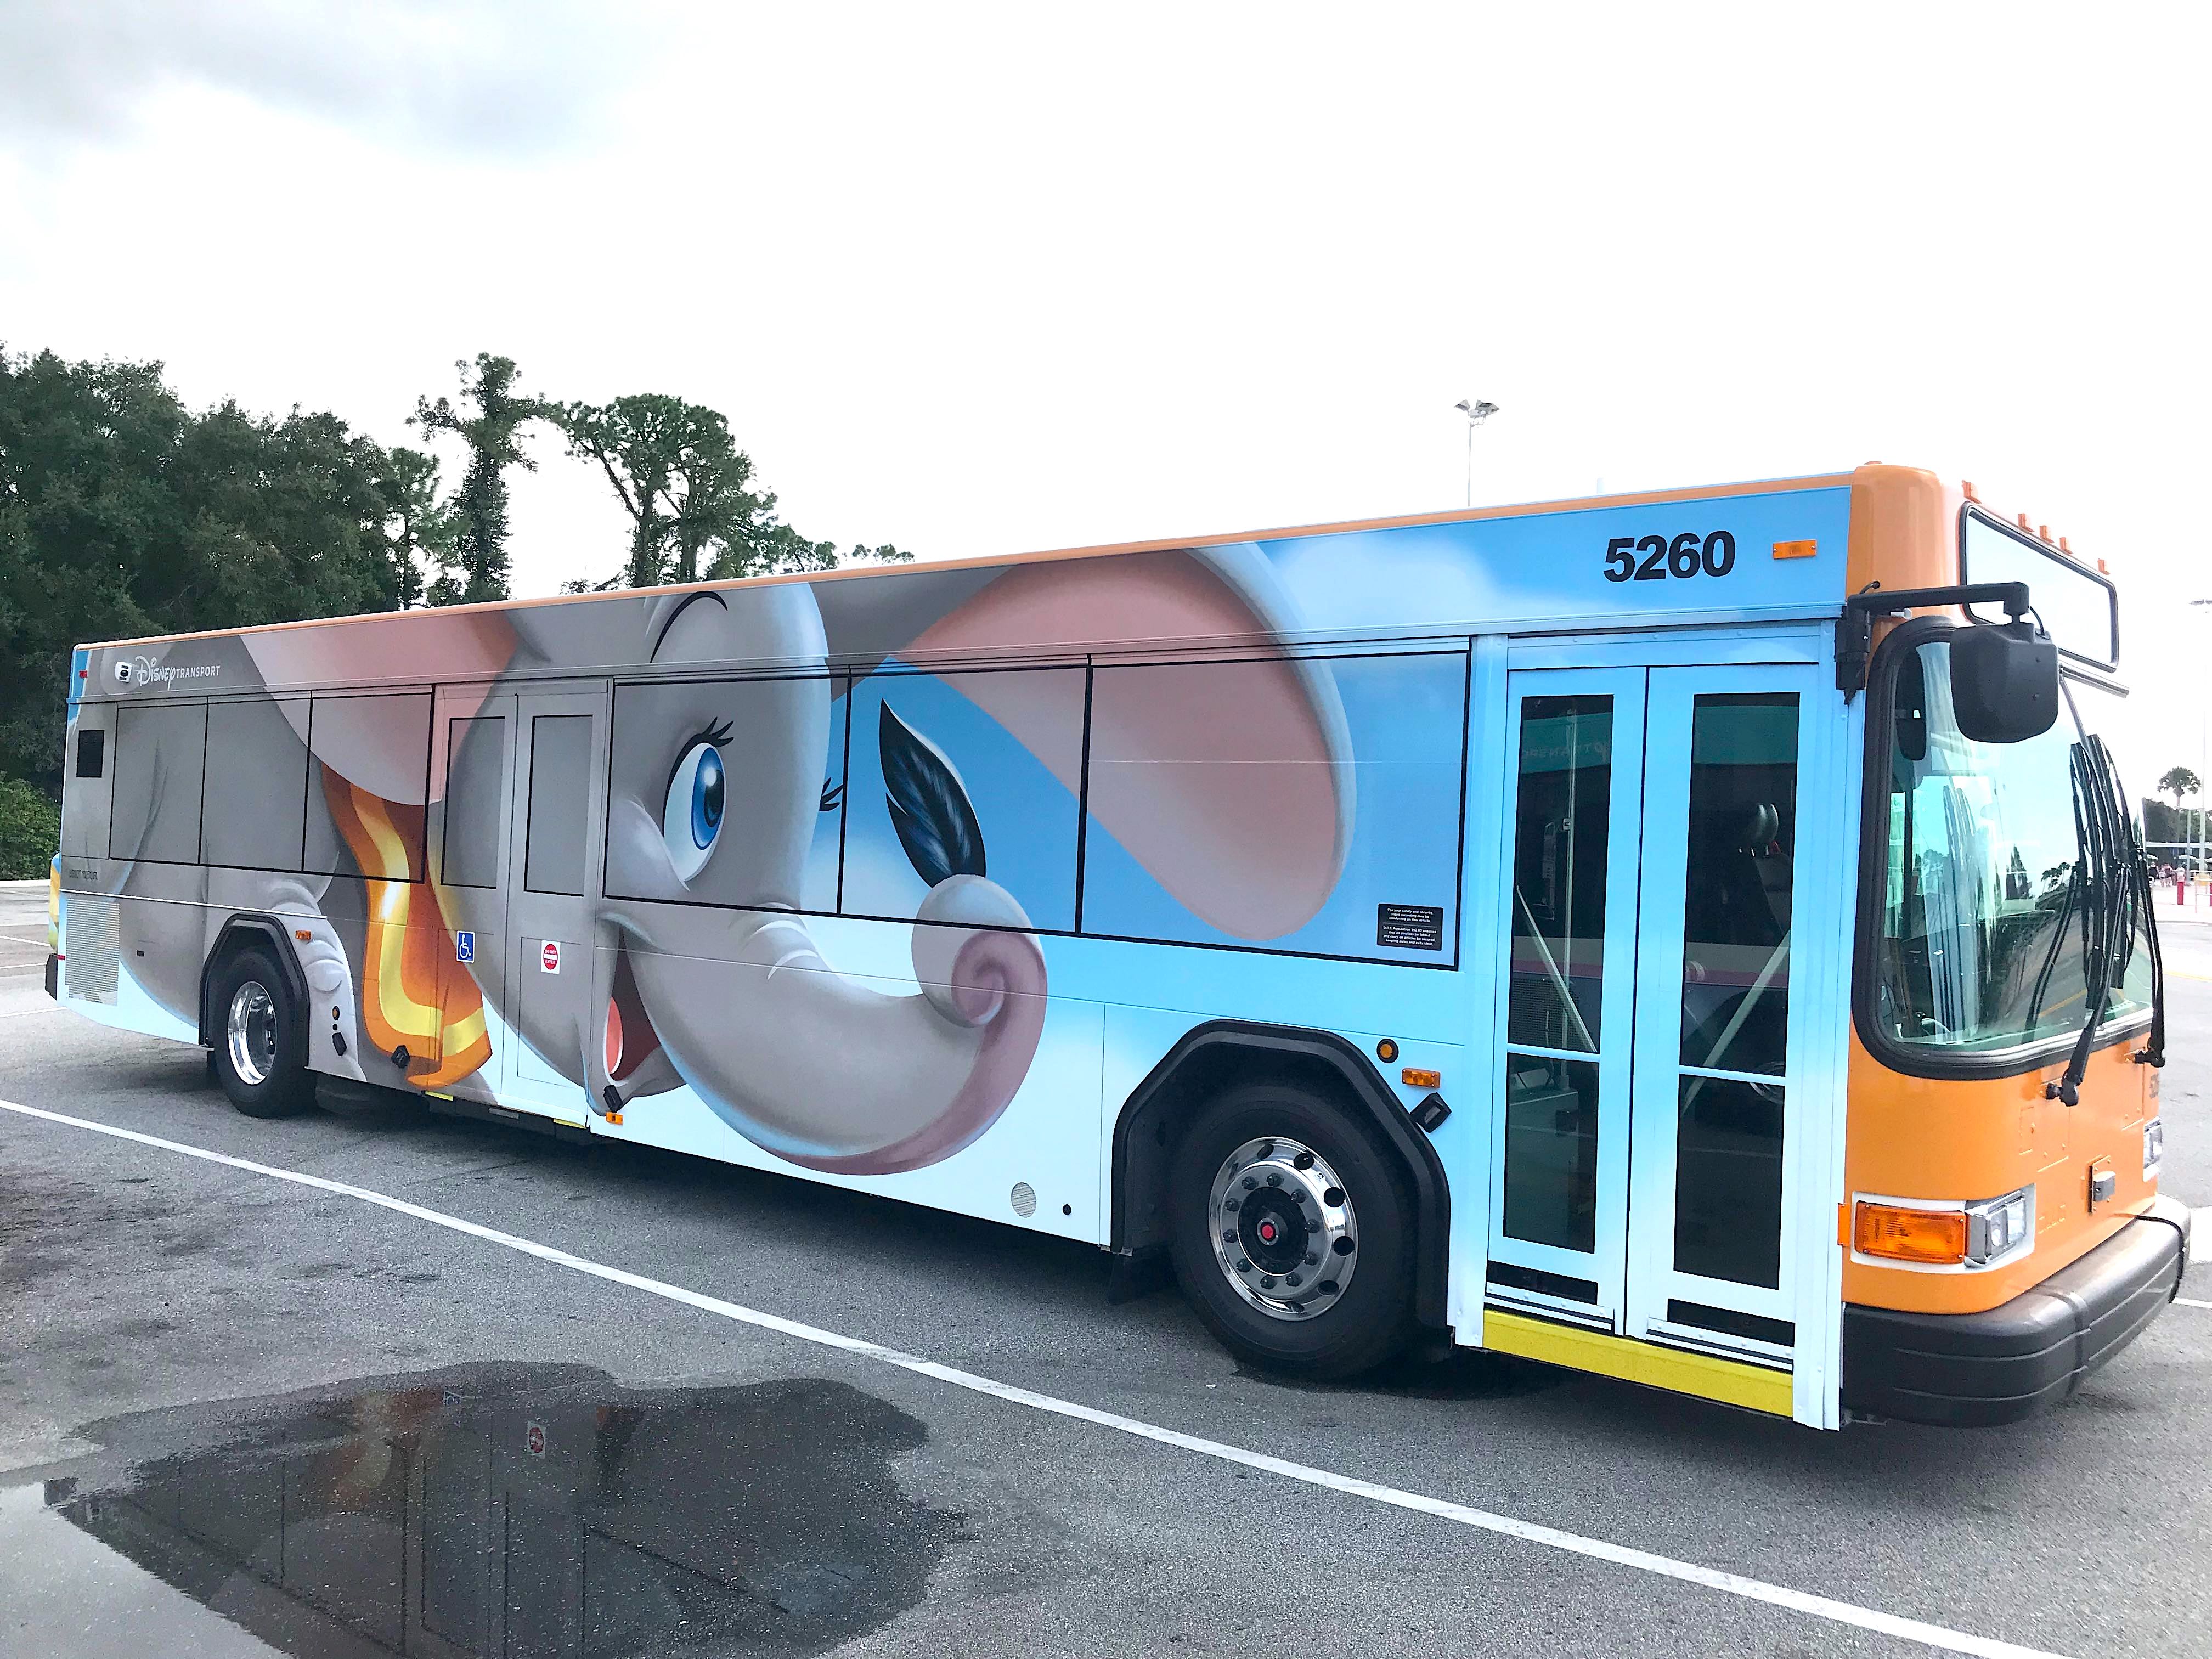 how long is bus ride from disney all star movies to magic kingdom